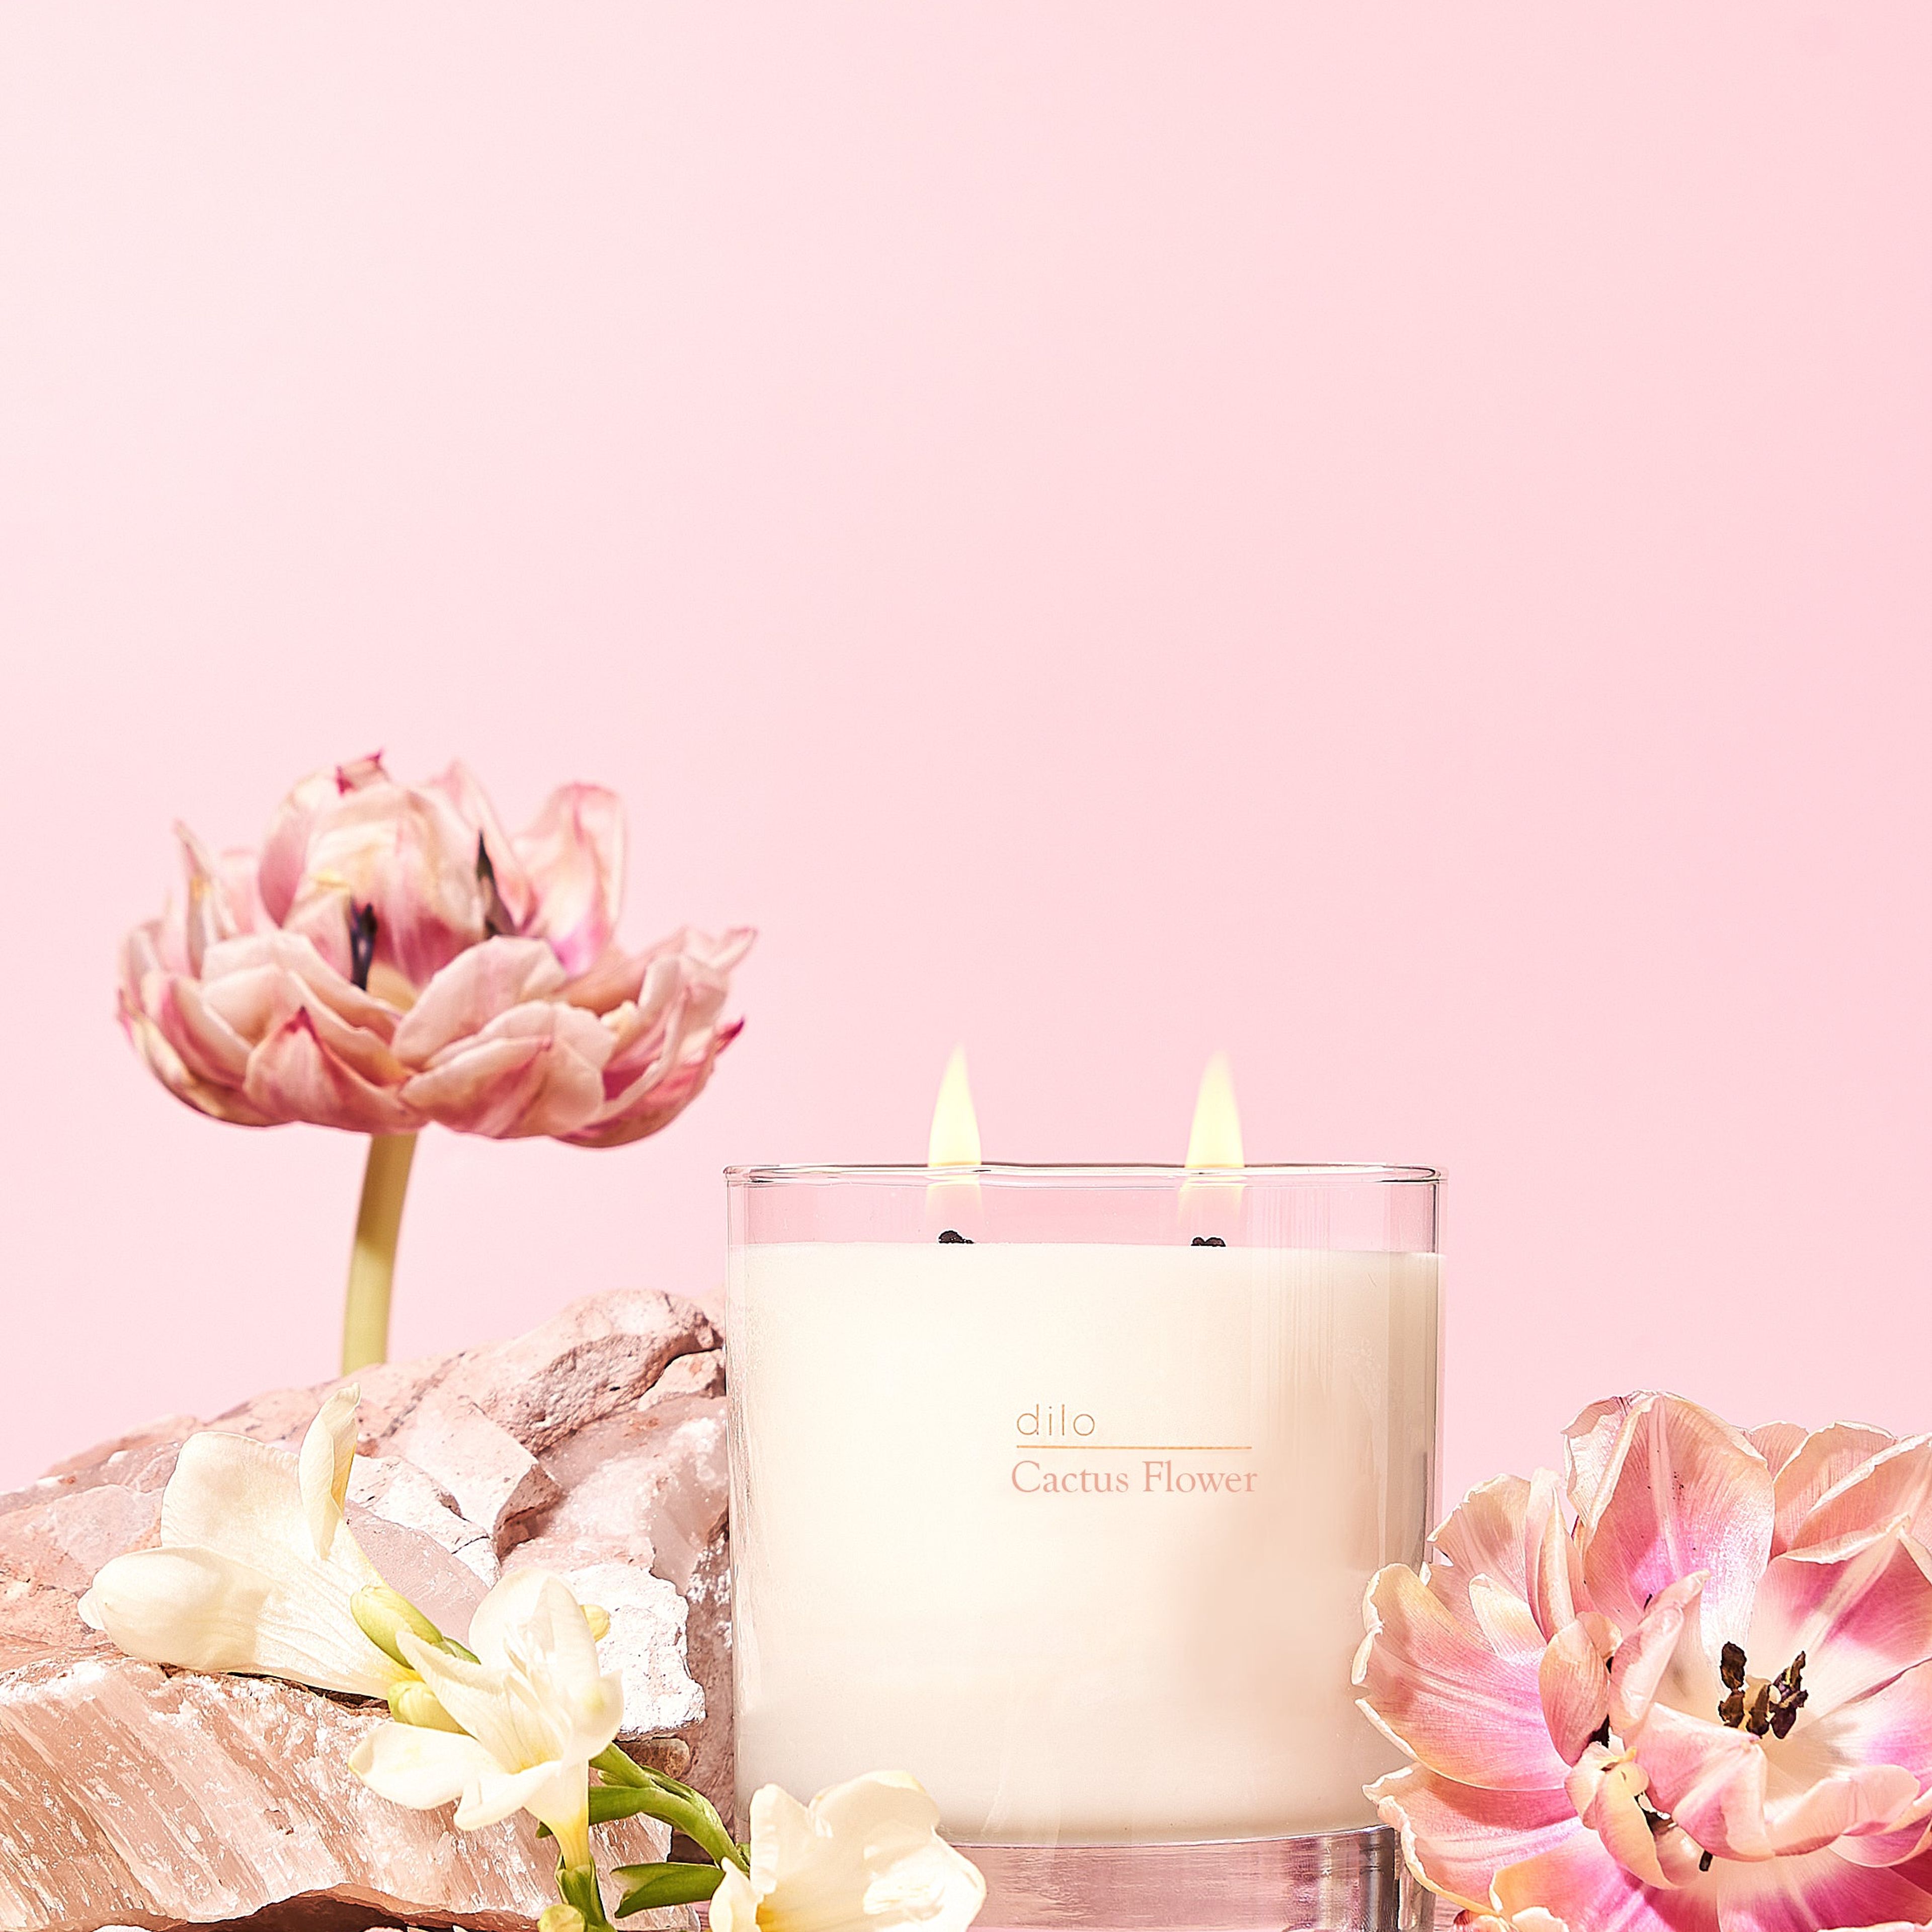 Cactus Flower Candle by dilo